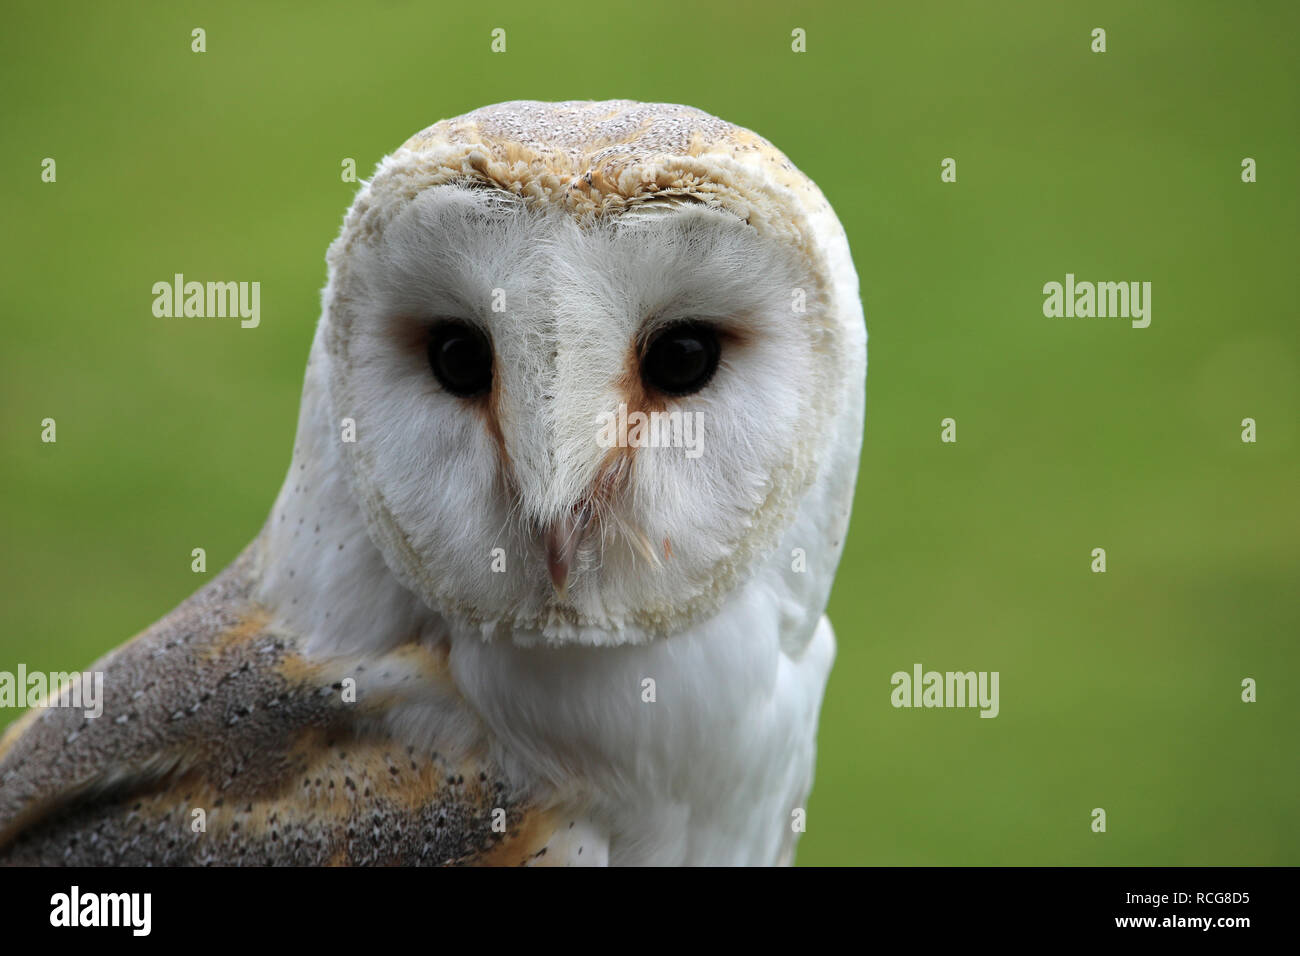 Head and shoulders of a barn owl (Tyto alba) with a green blurred background. Stock Photo